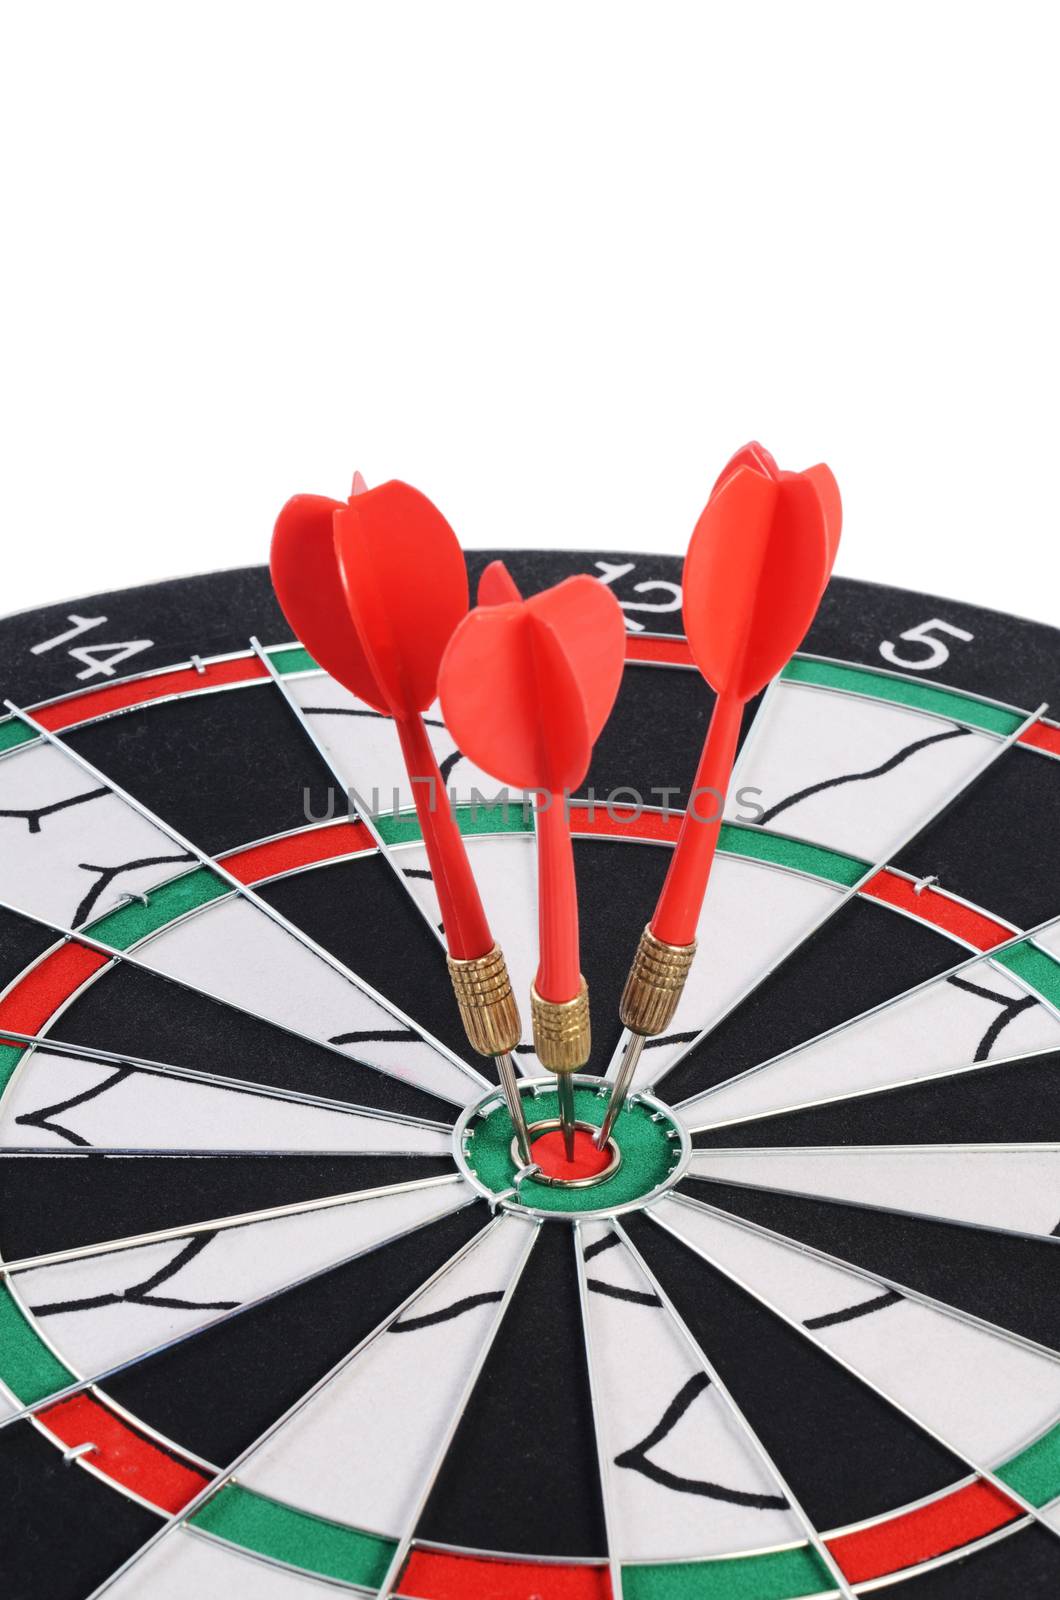 The darts isolated on a  white background